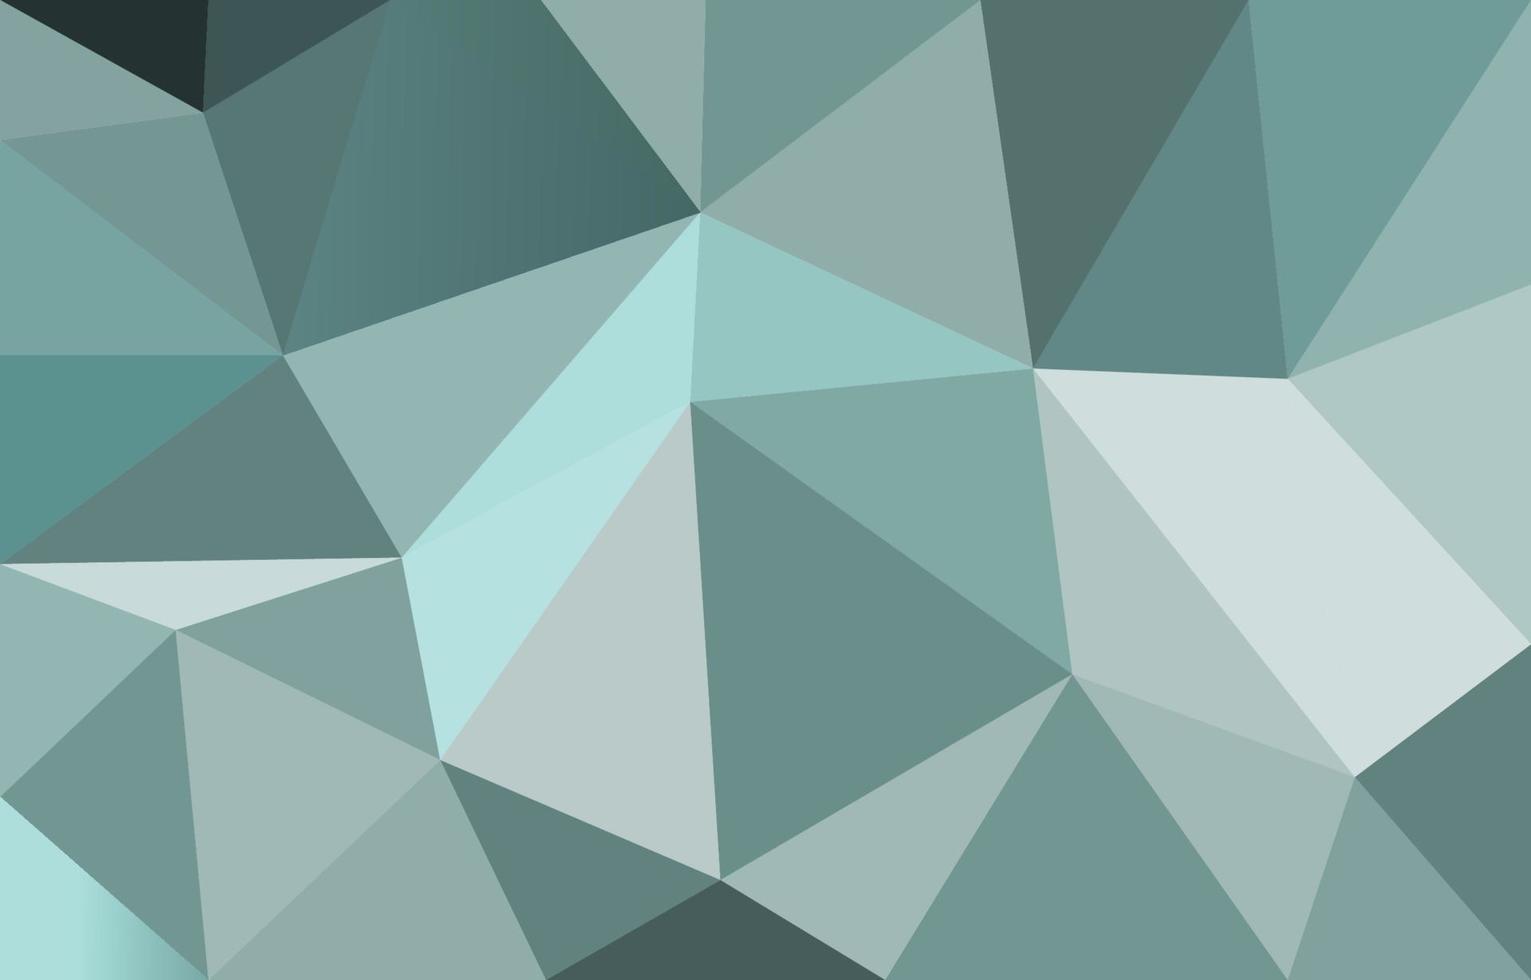 abstract blue geometric low poly graphic repeat pattern made out of diamond triangular mosaic style.Vector pattern background. vector